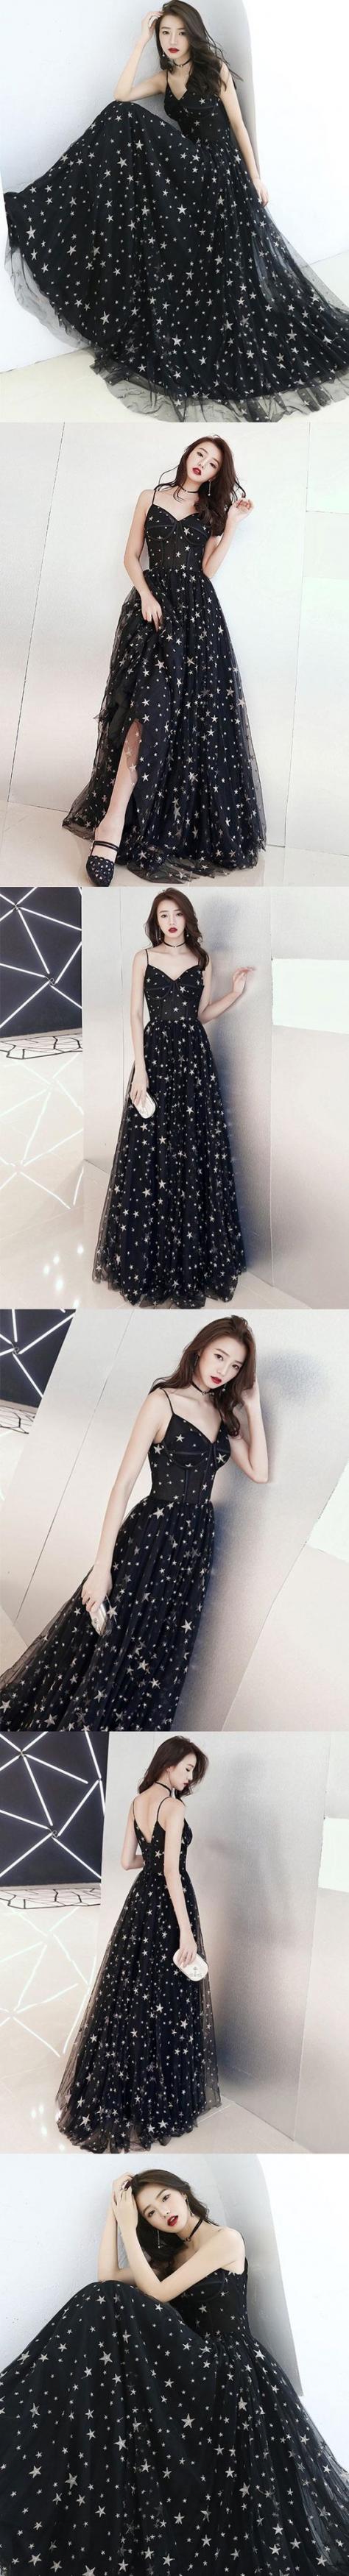 Chic Prom Dresses A-line Floor-length Star Lace Beautiful Long Black Prom Dress M6901